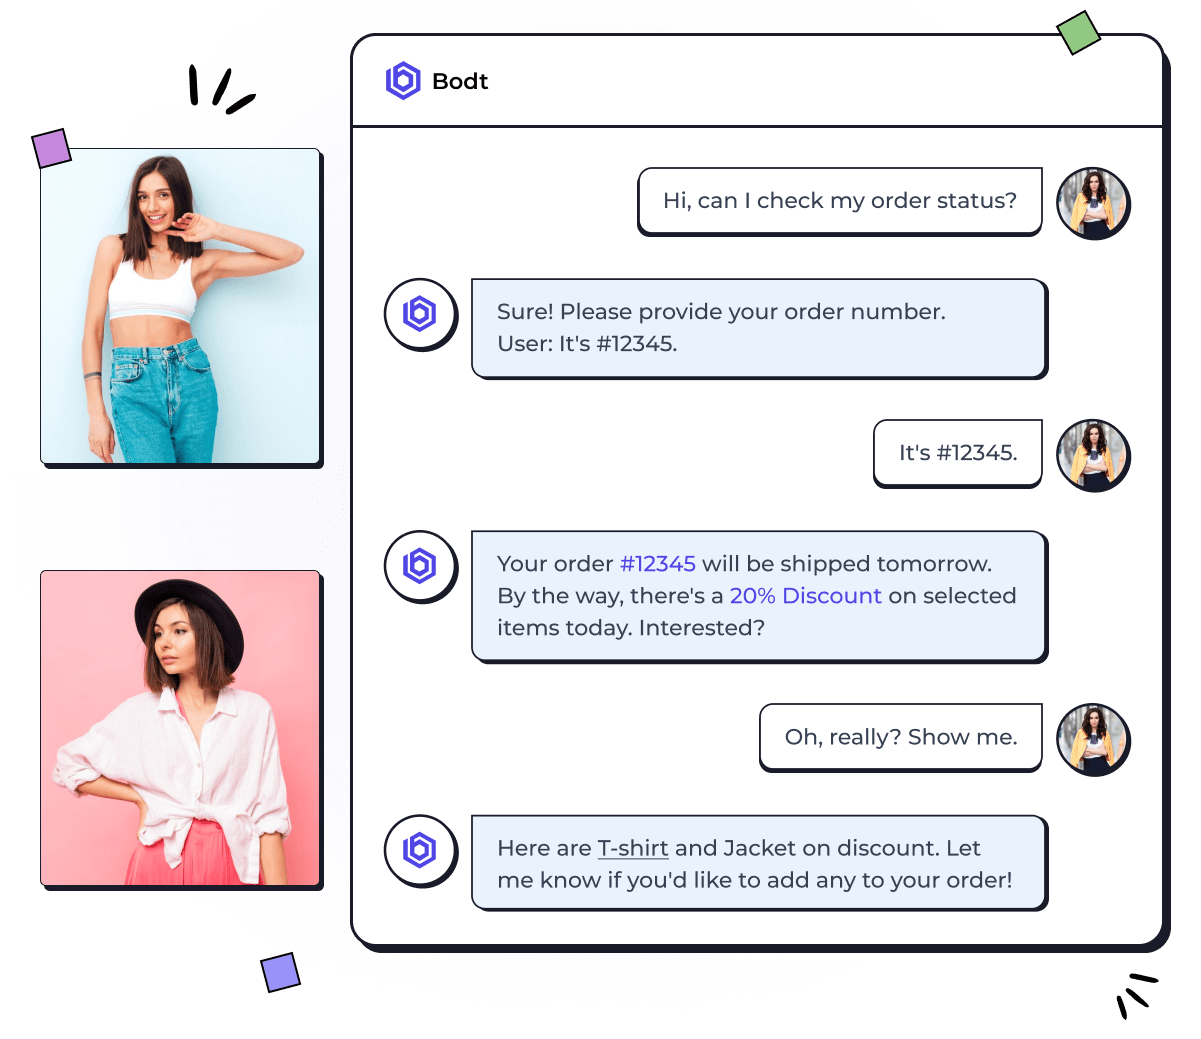 Empower Your Customers with Bodt's All-in-One Chatbot